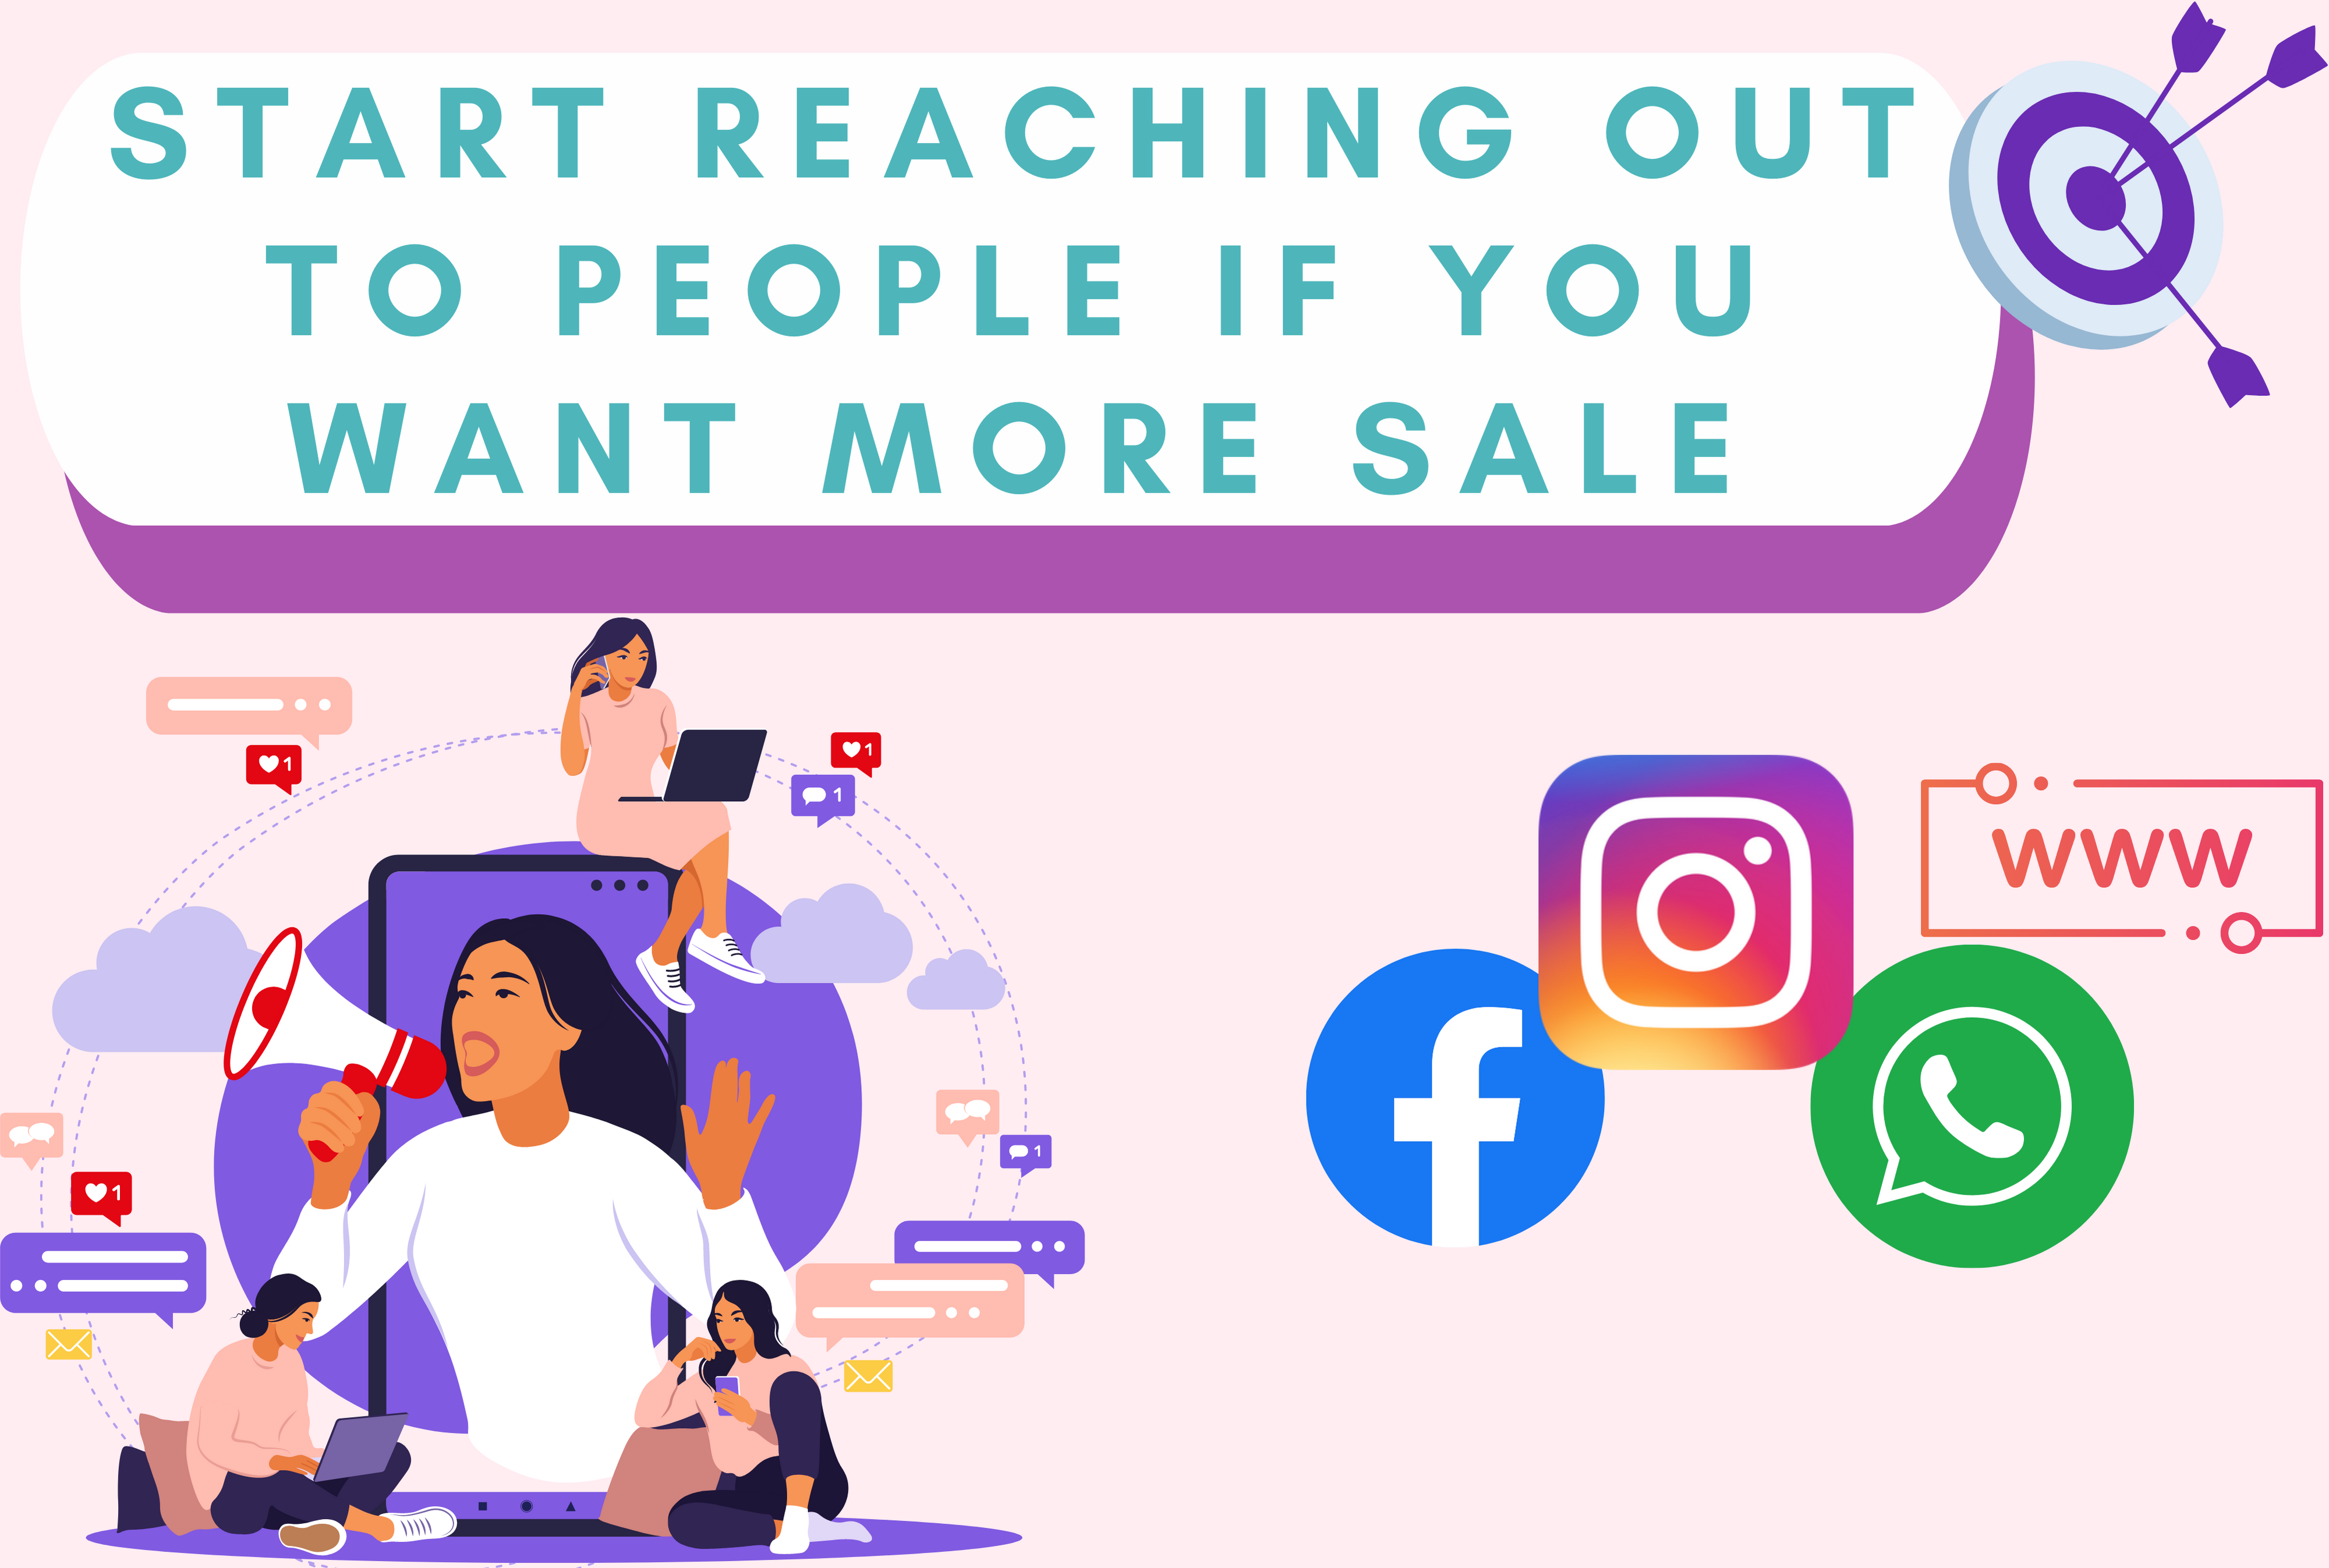 Start reaching out to people if you want more sales